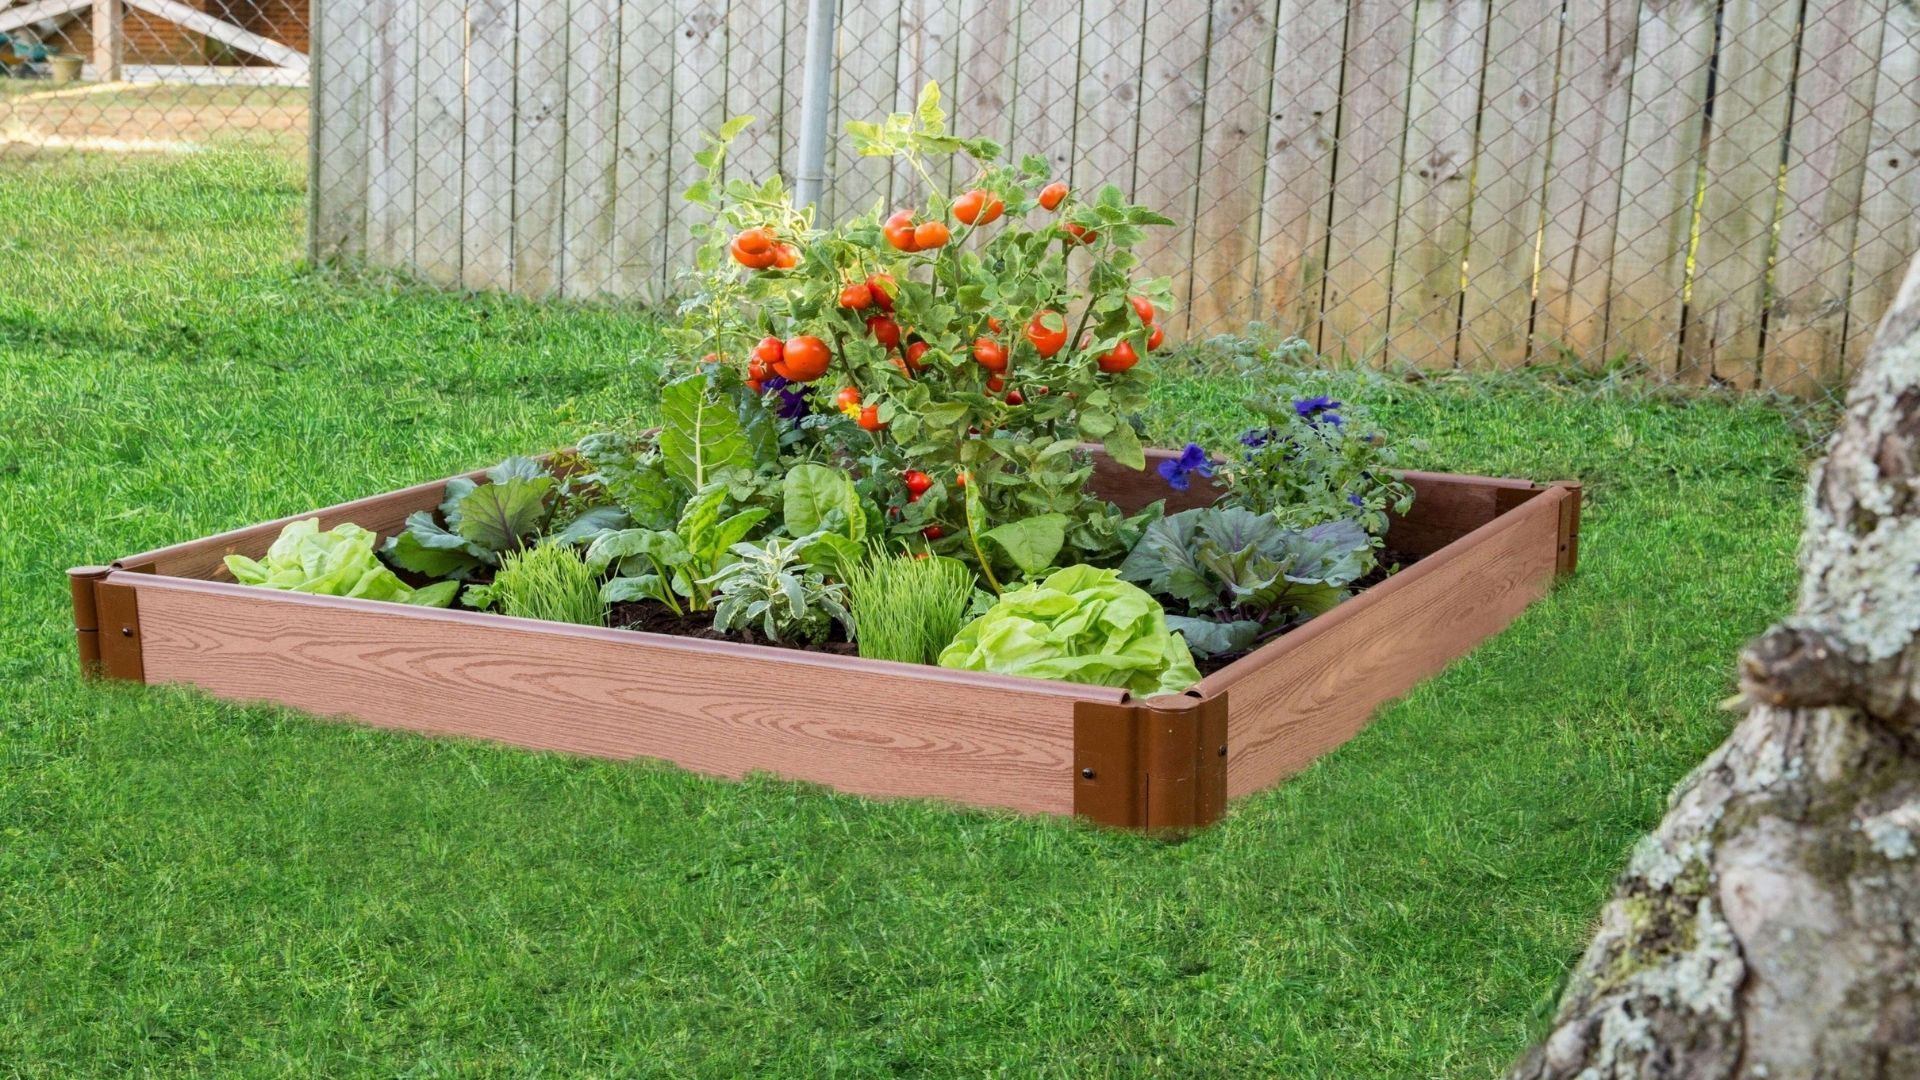 Tool-Free 4' x 4' Raised Garden Bed Raised Garden Beds Frame It All 